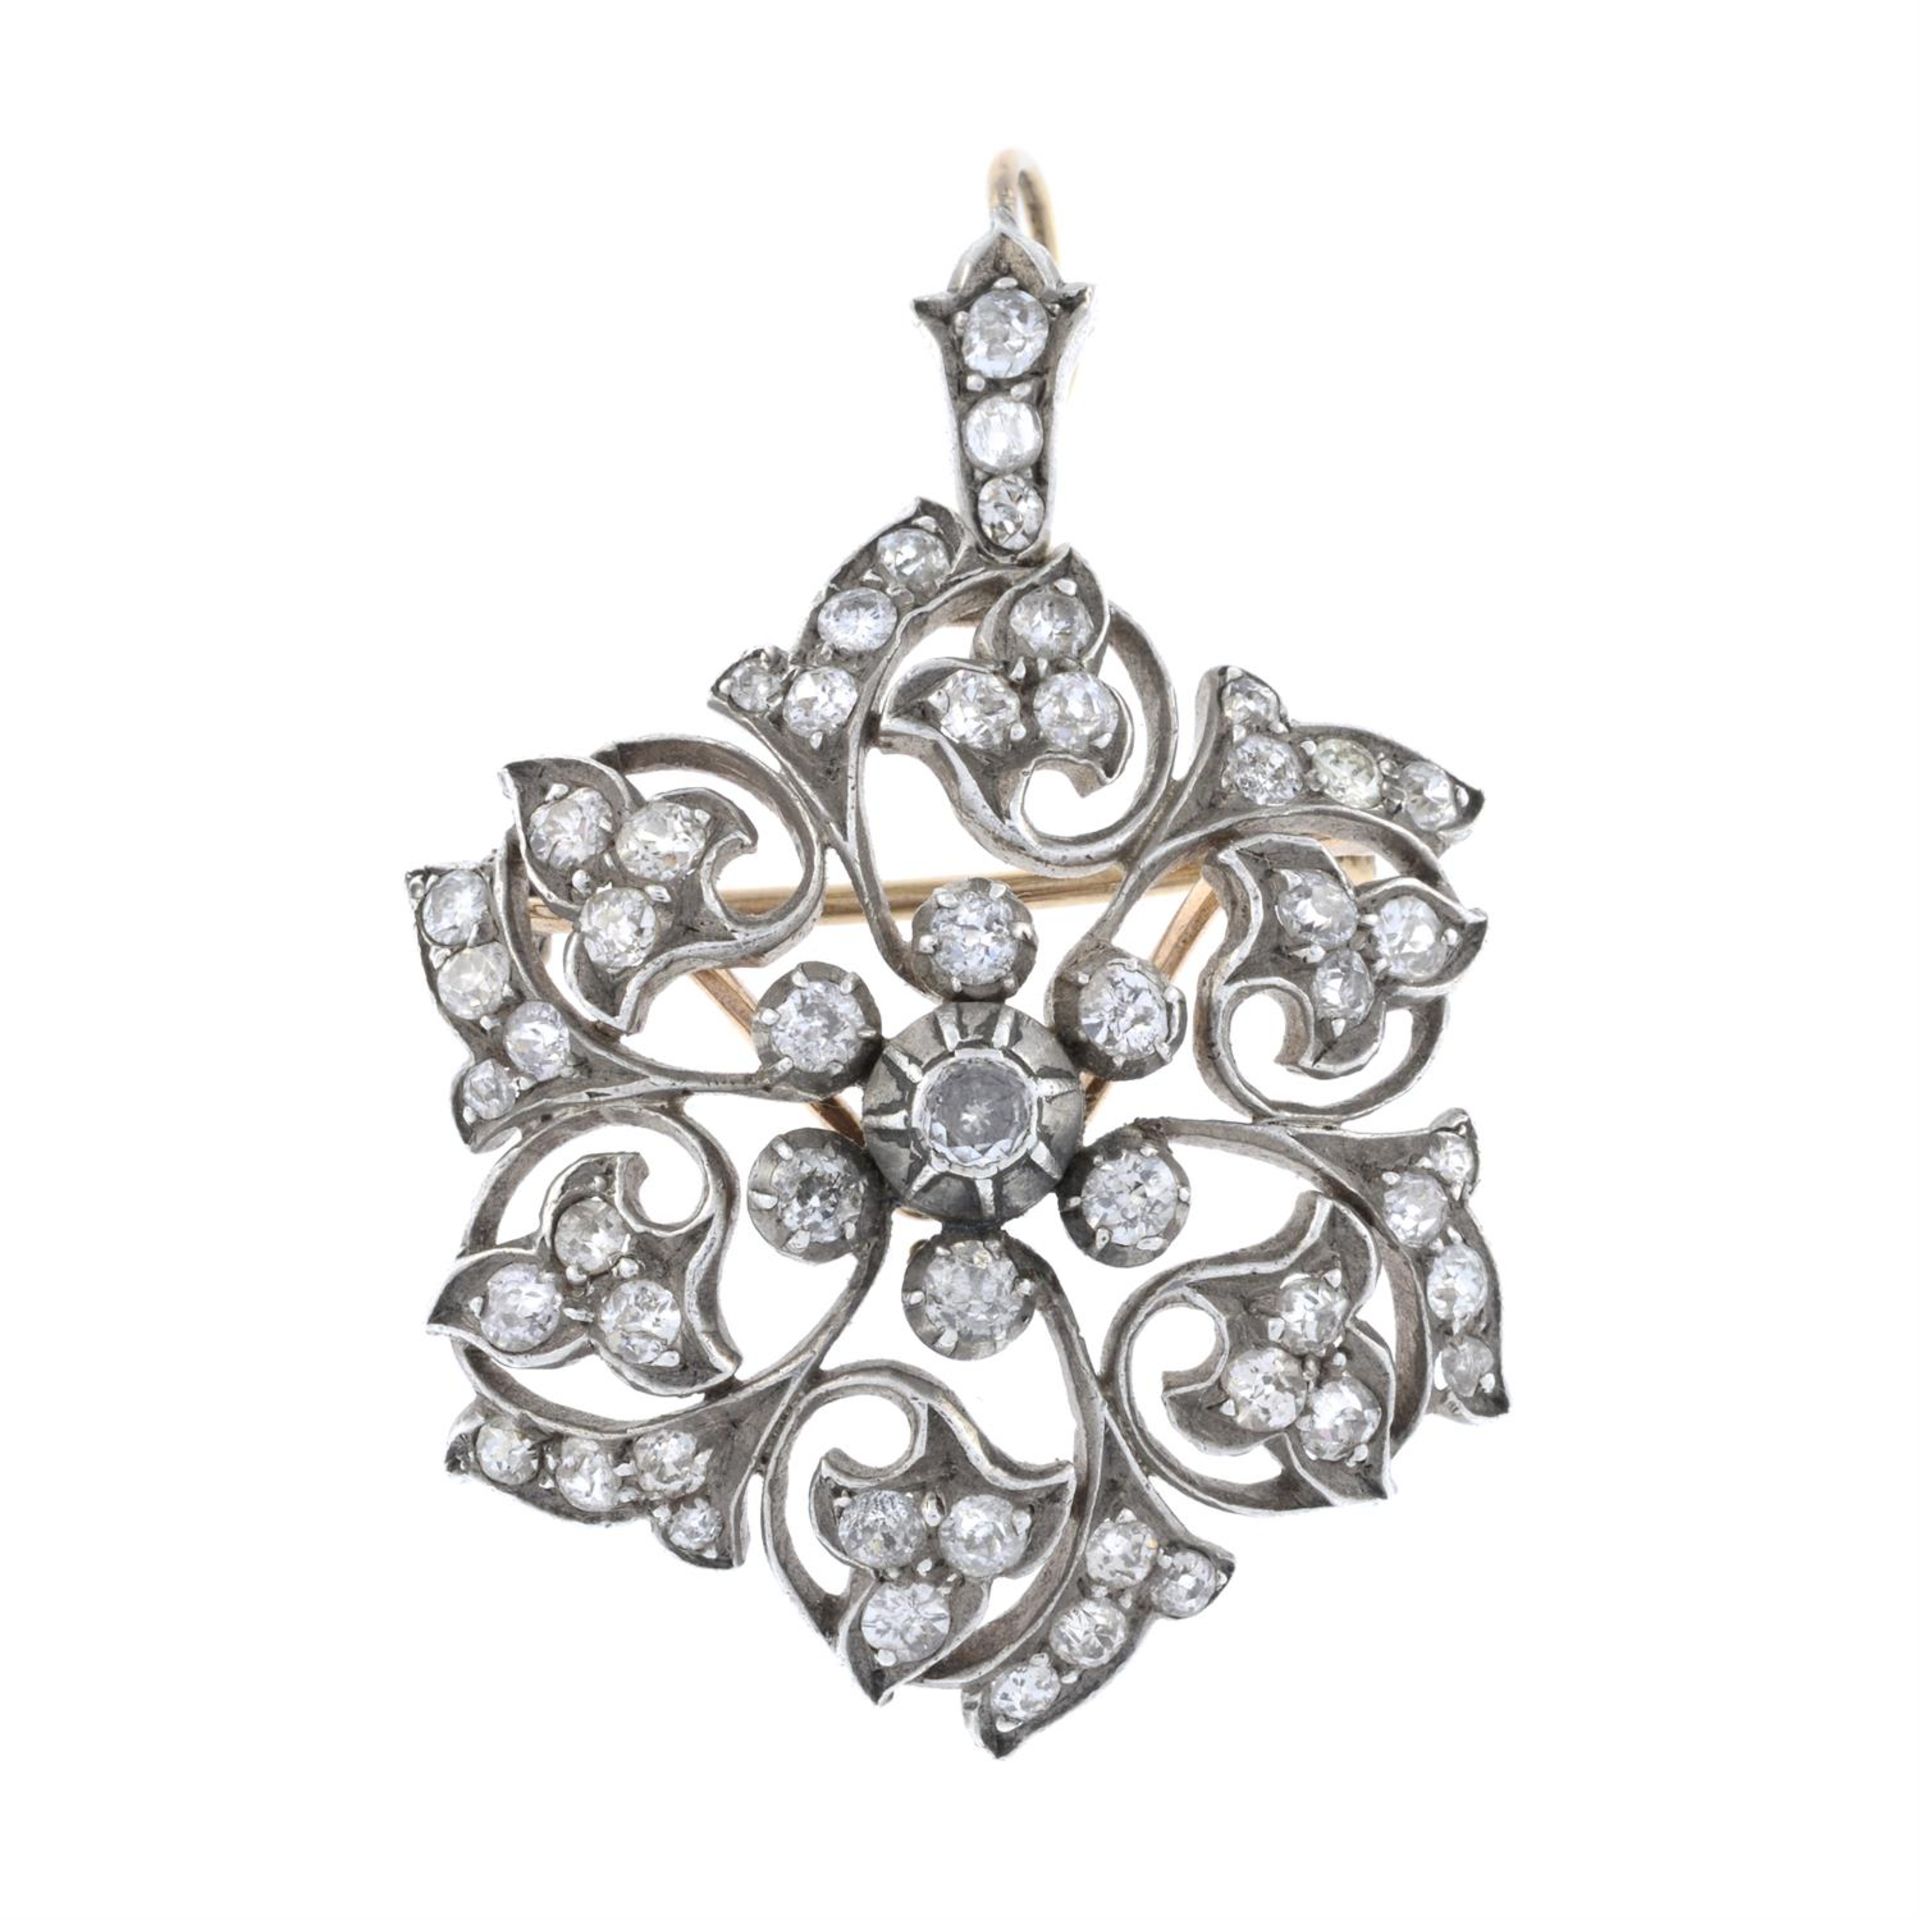 Victorian silver and gold diamond pendant/brooch - Image 2 of 4